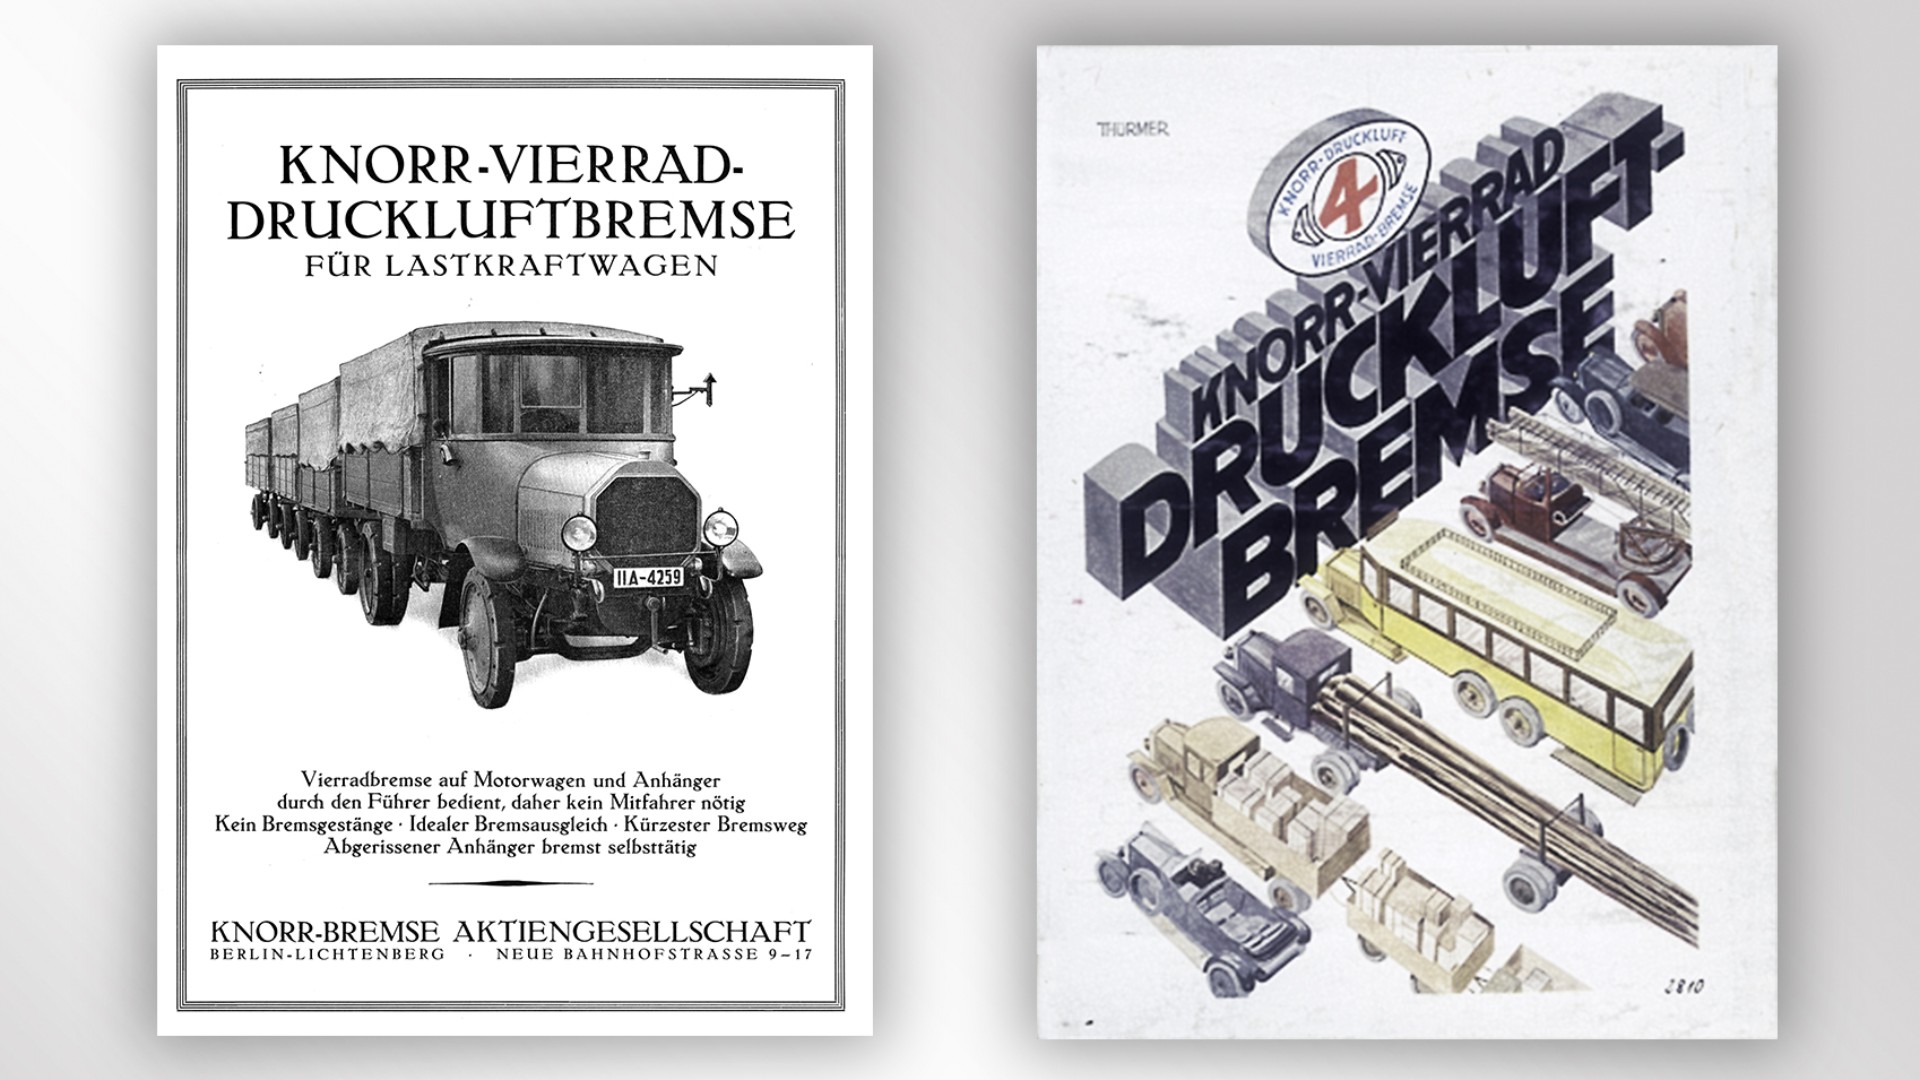 An old advertising poster about the Knorr four-wheel air brake in black and white with a truck from that time and an ad from the same time showing various vehicles that were equipped with the brake